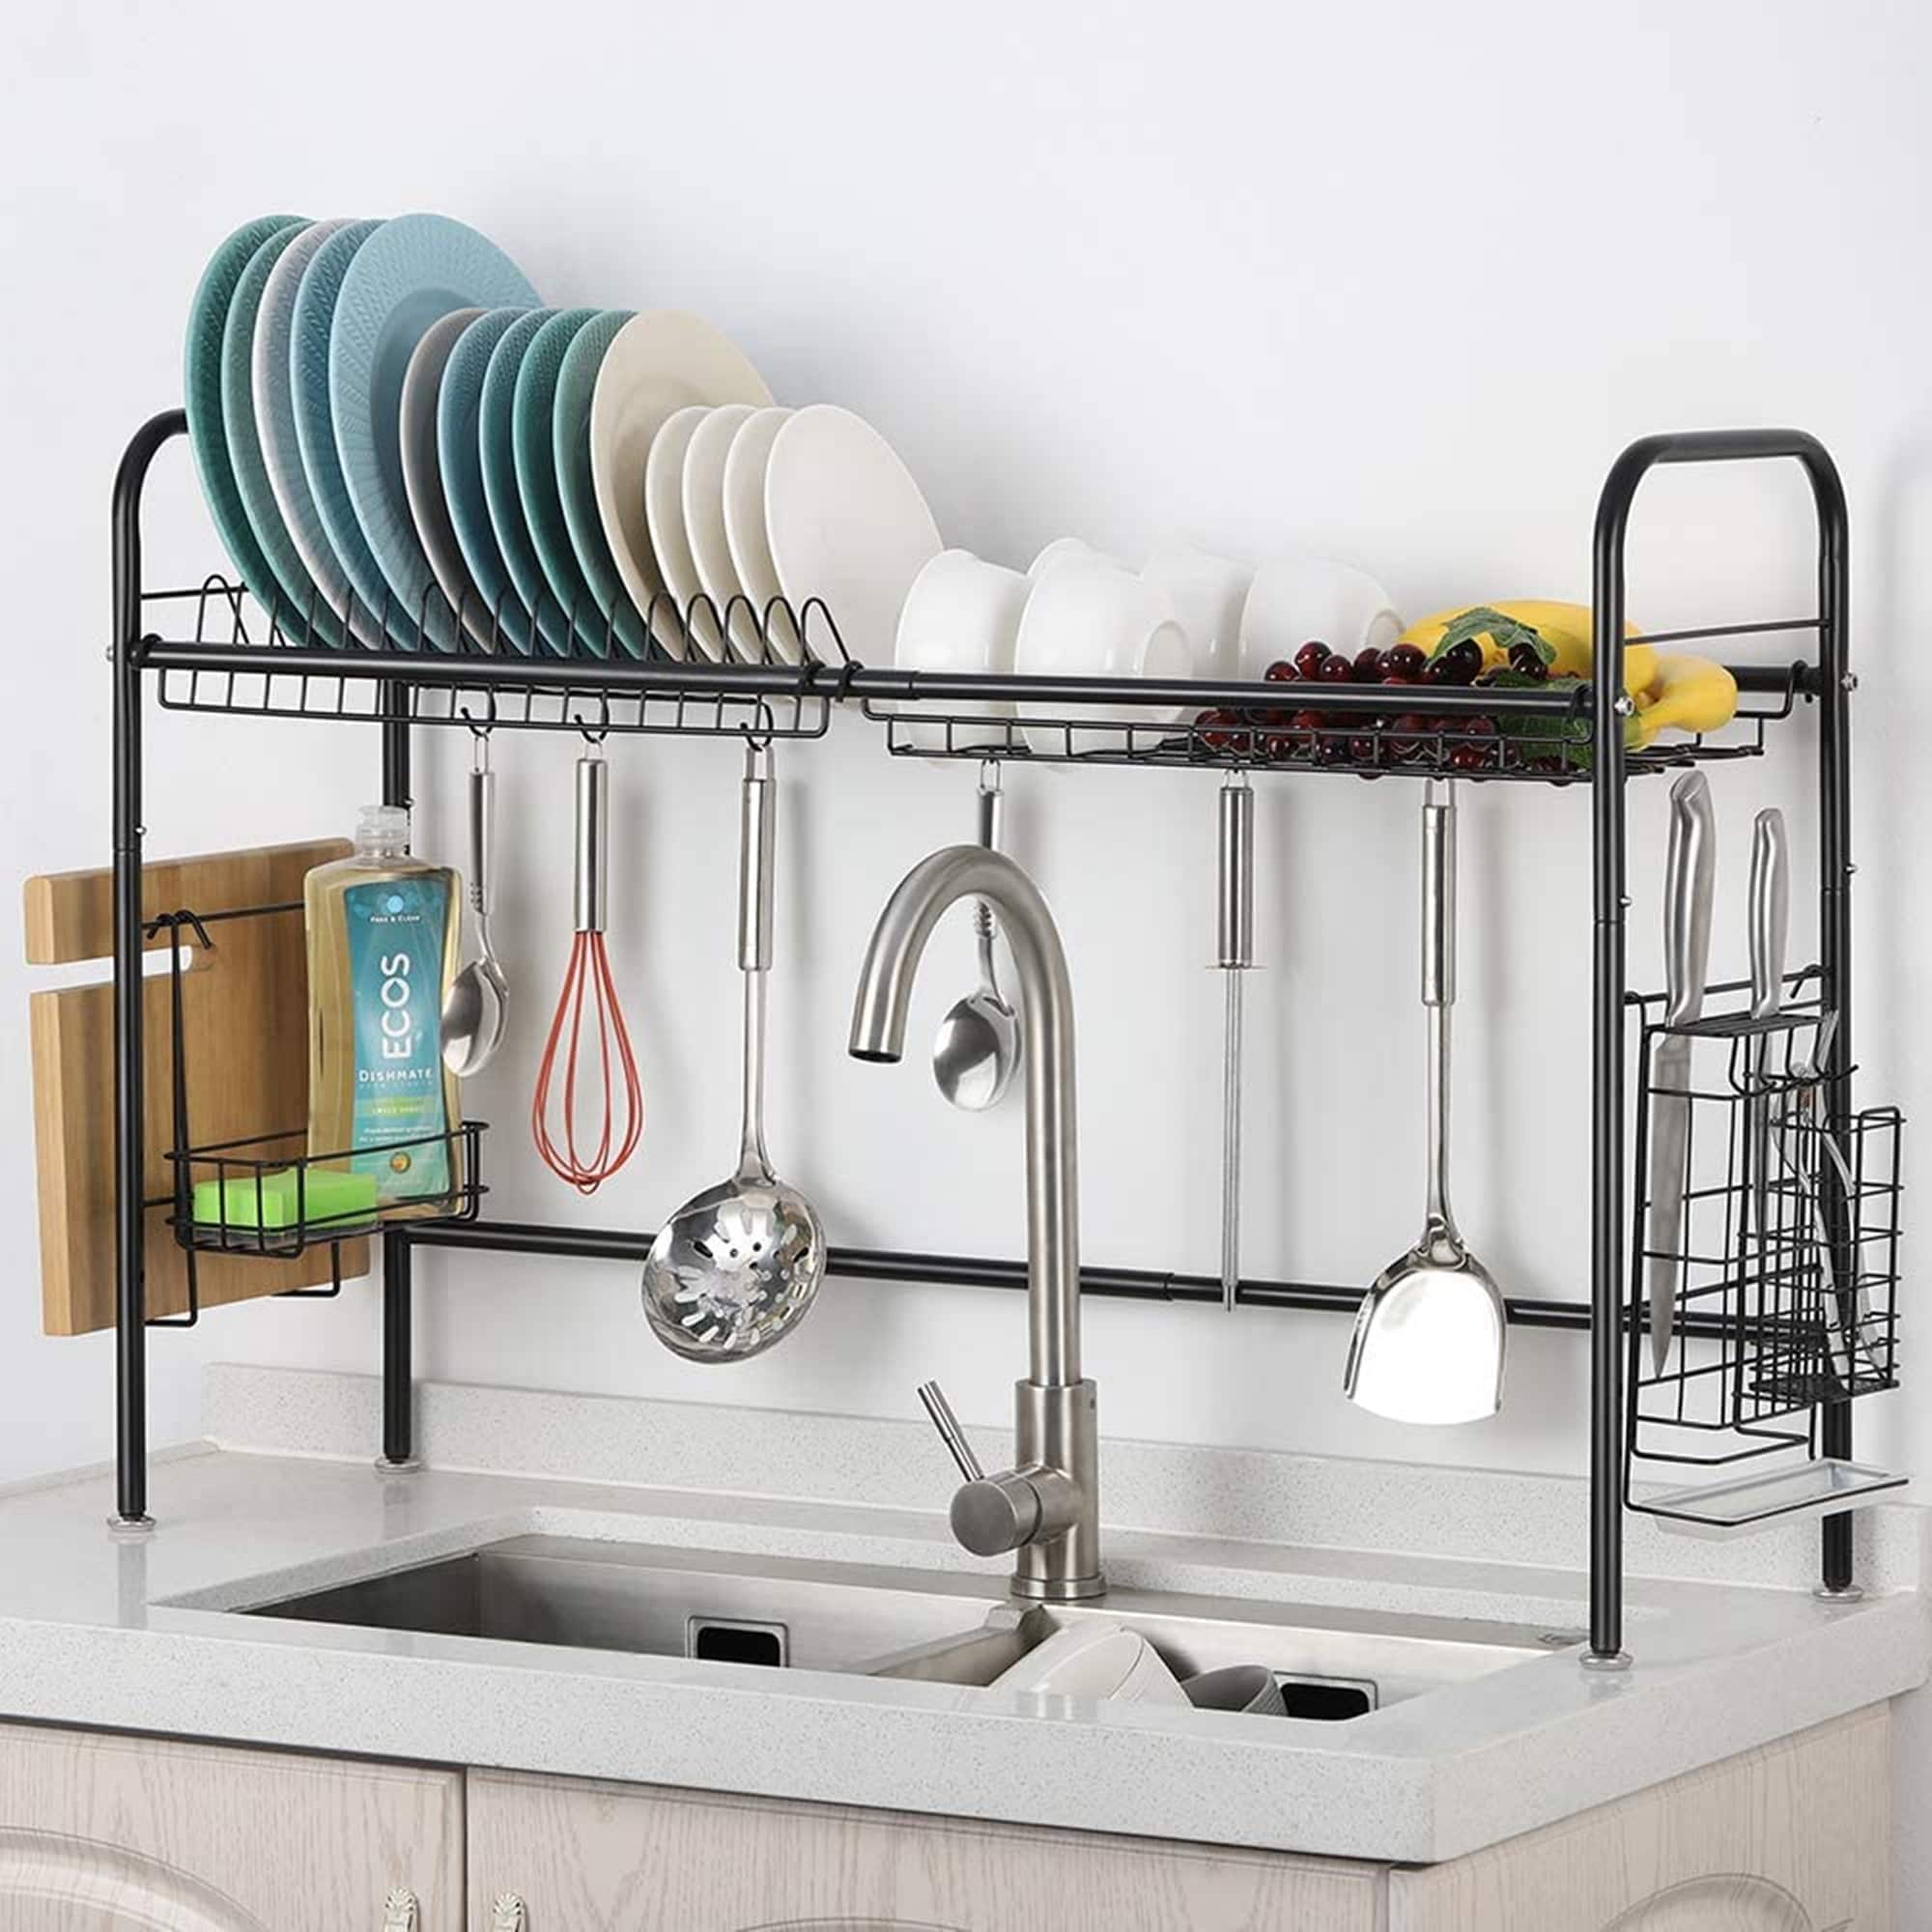 37in. Stainless Steel Dish Drying Rack Over Kitchen Sink, Dishes